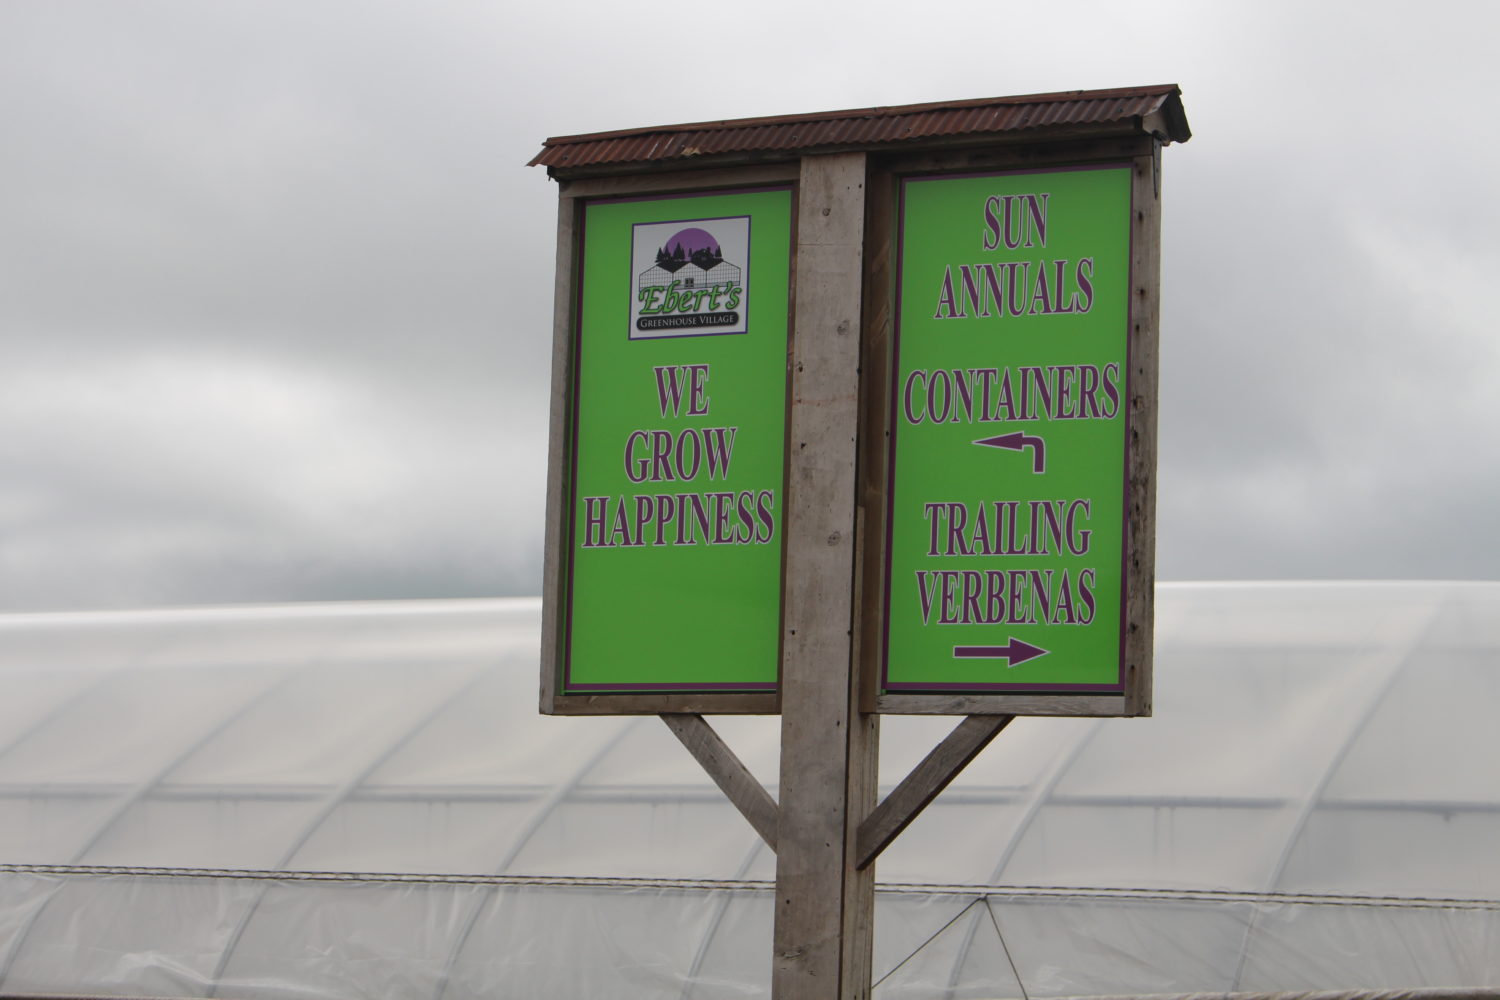 Ebert’s Greenhouse Village’s “We Grow Happiness” signs can be found throughout the property.